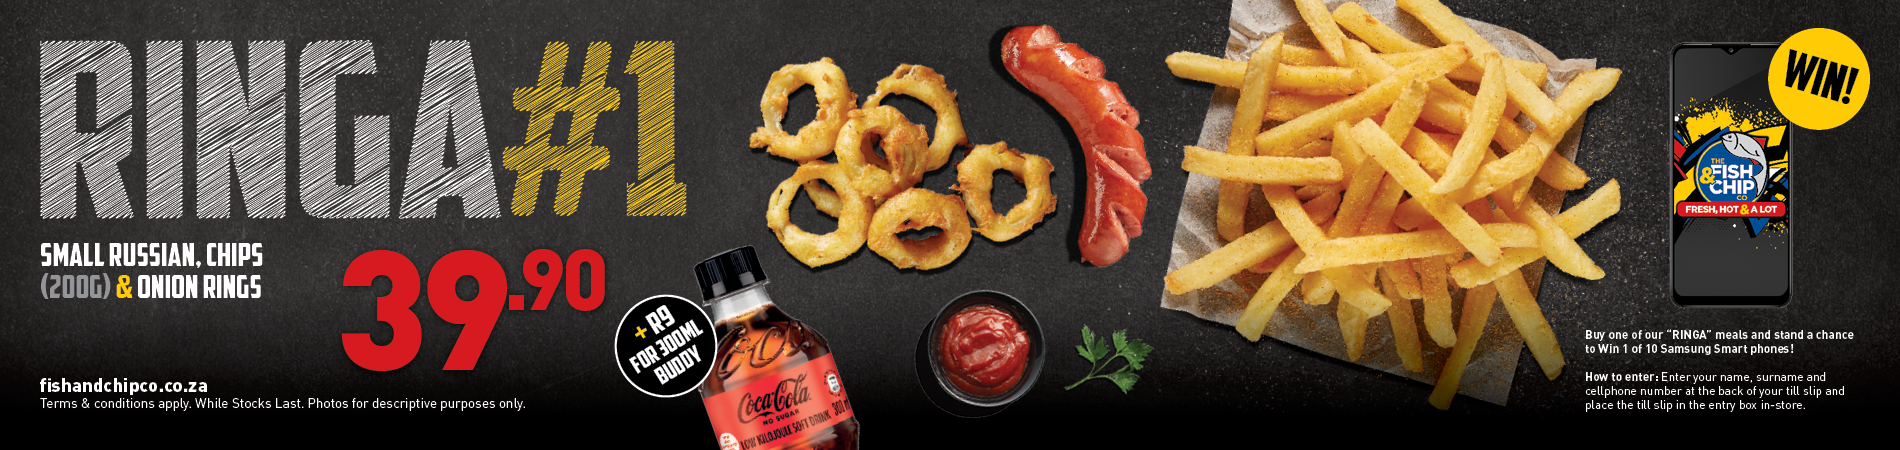 Ringa#1 Deal: Small Russian, Chips (200g) & Onion Ring 39.90